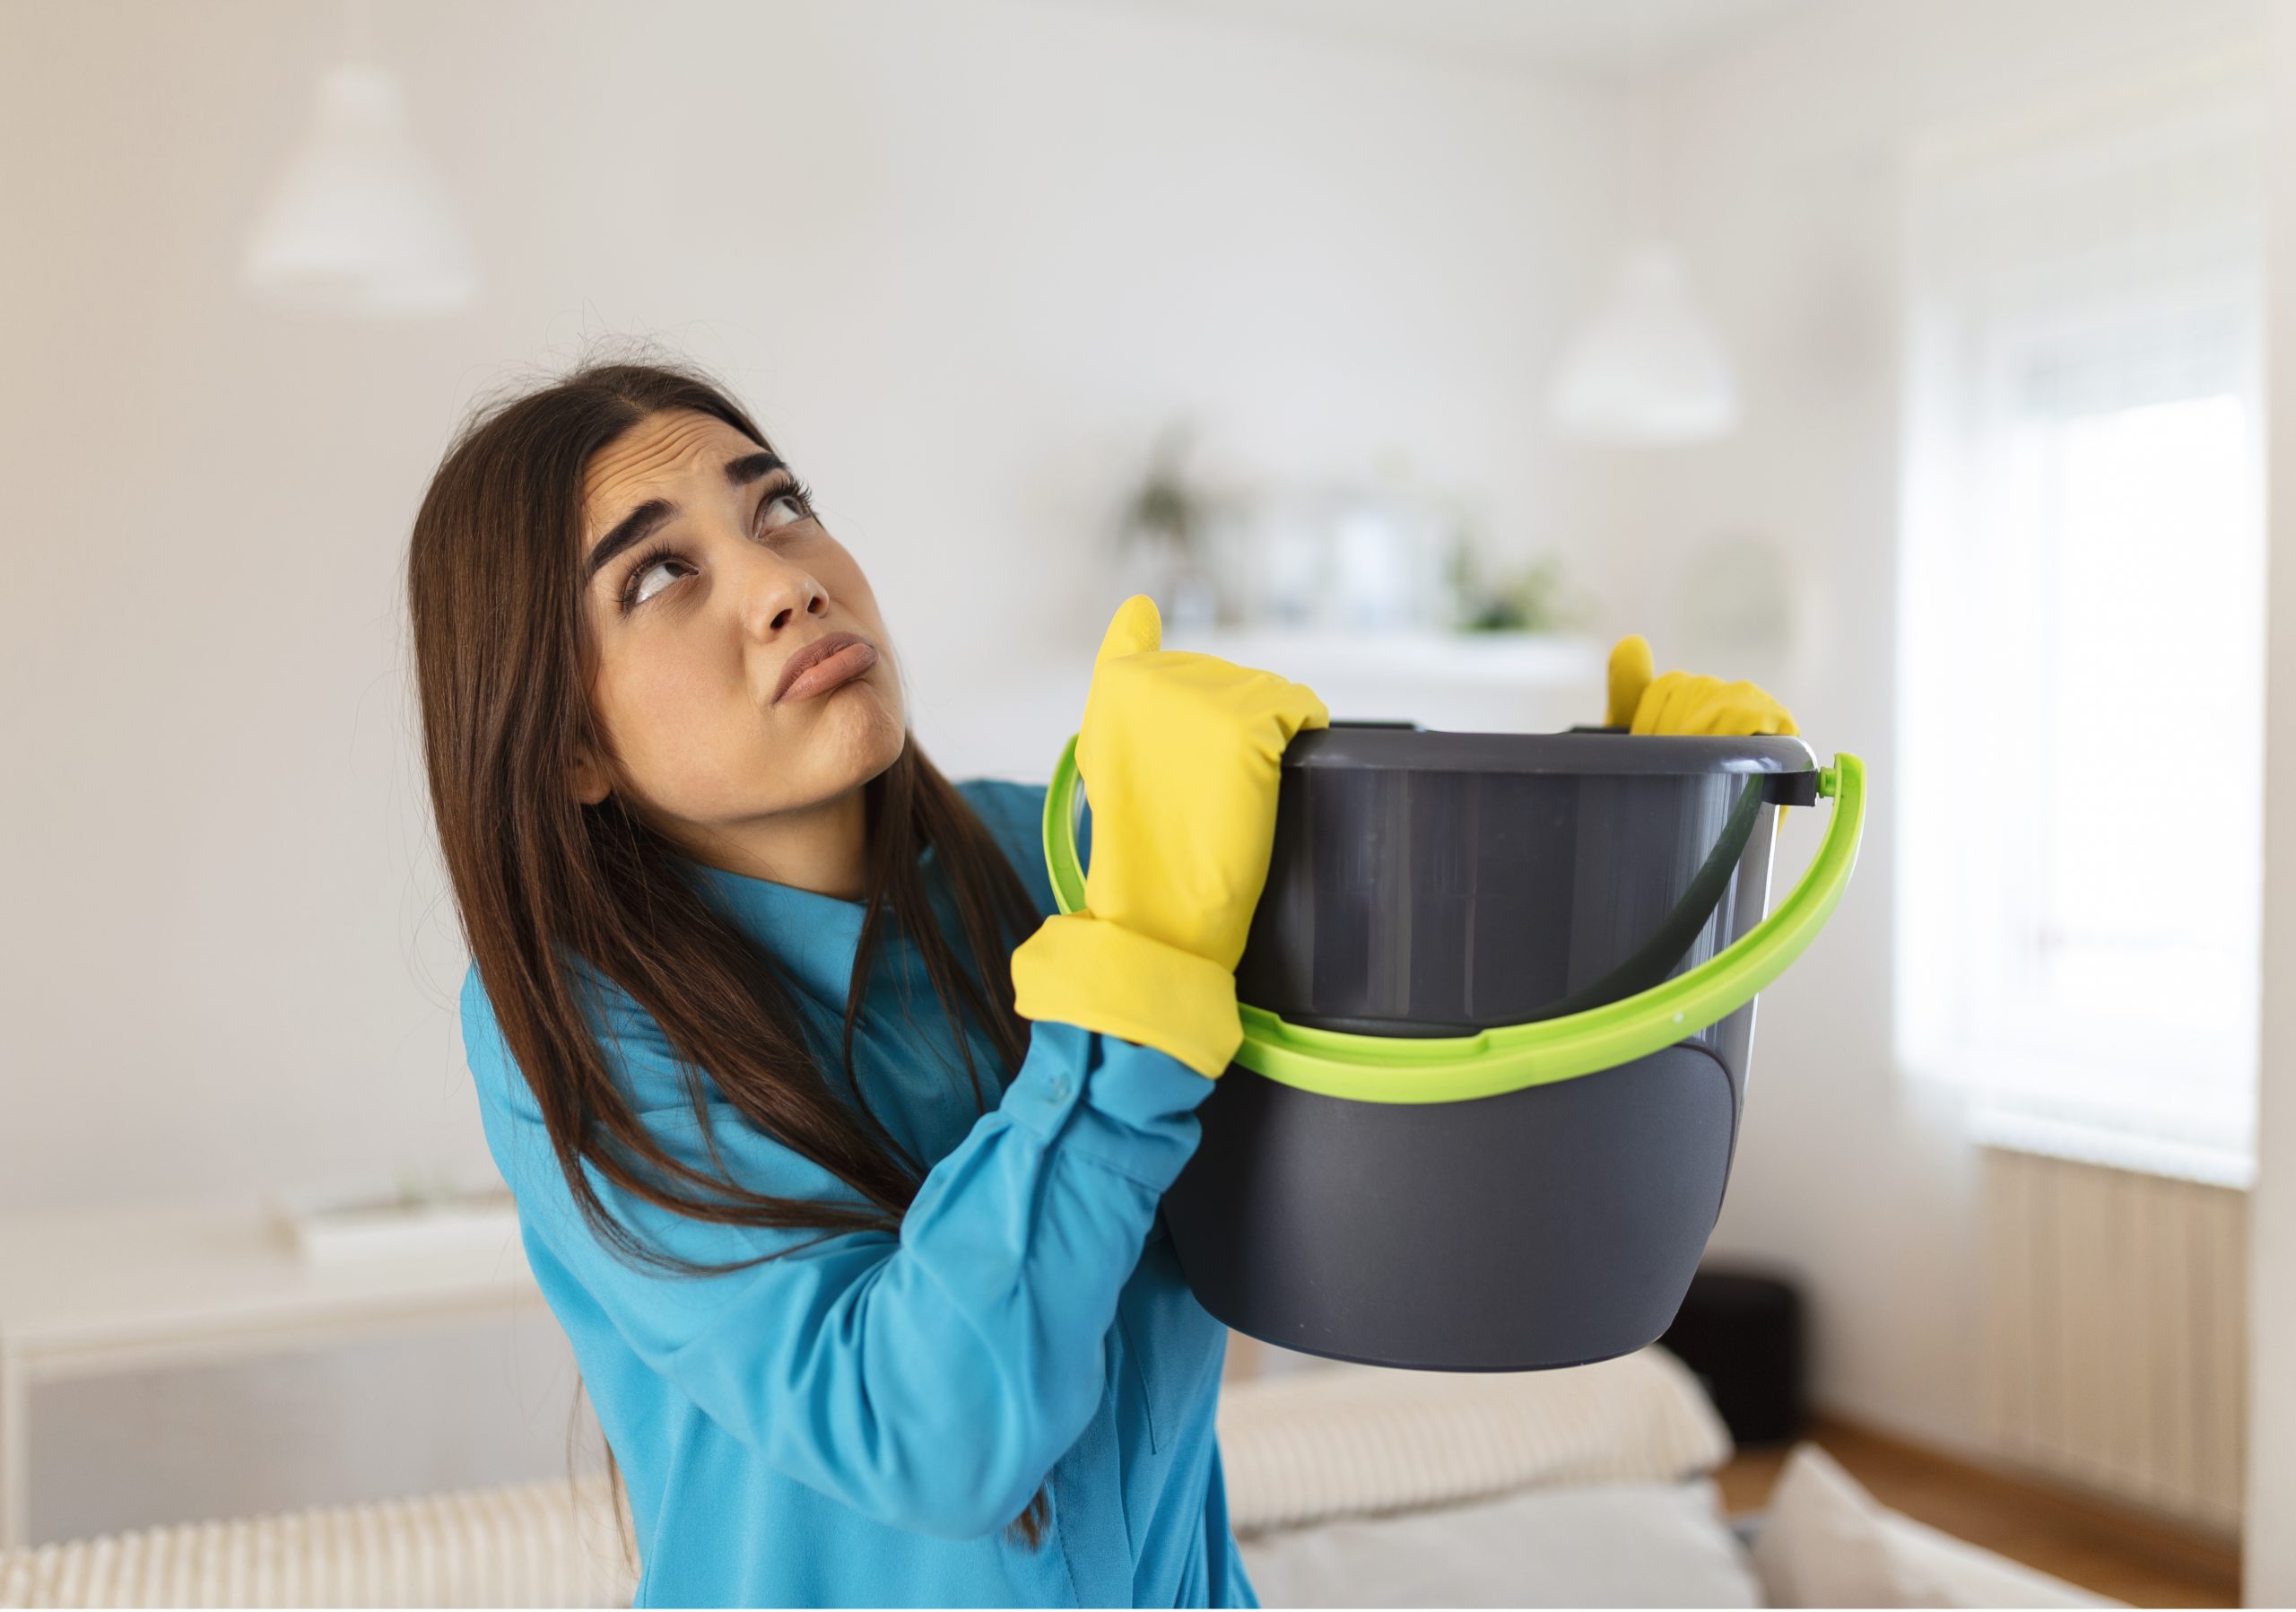 Water Damage Cleaning Contractor New York - A Woman Catching a Roof Leak in a Bucket